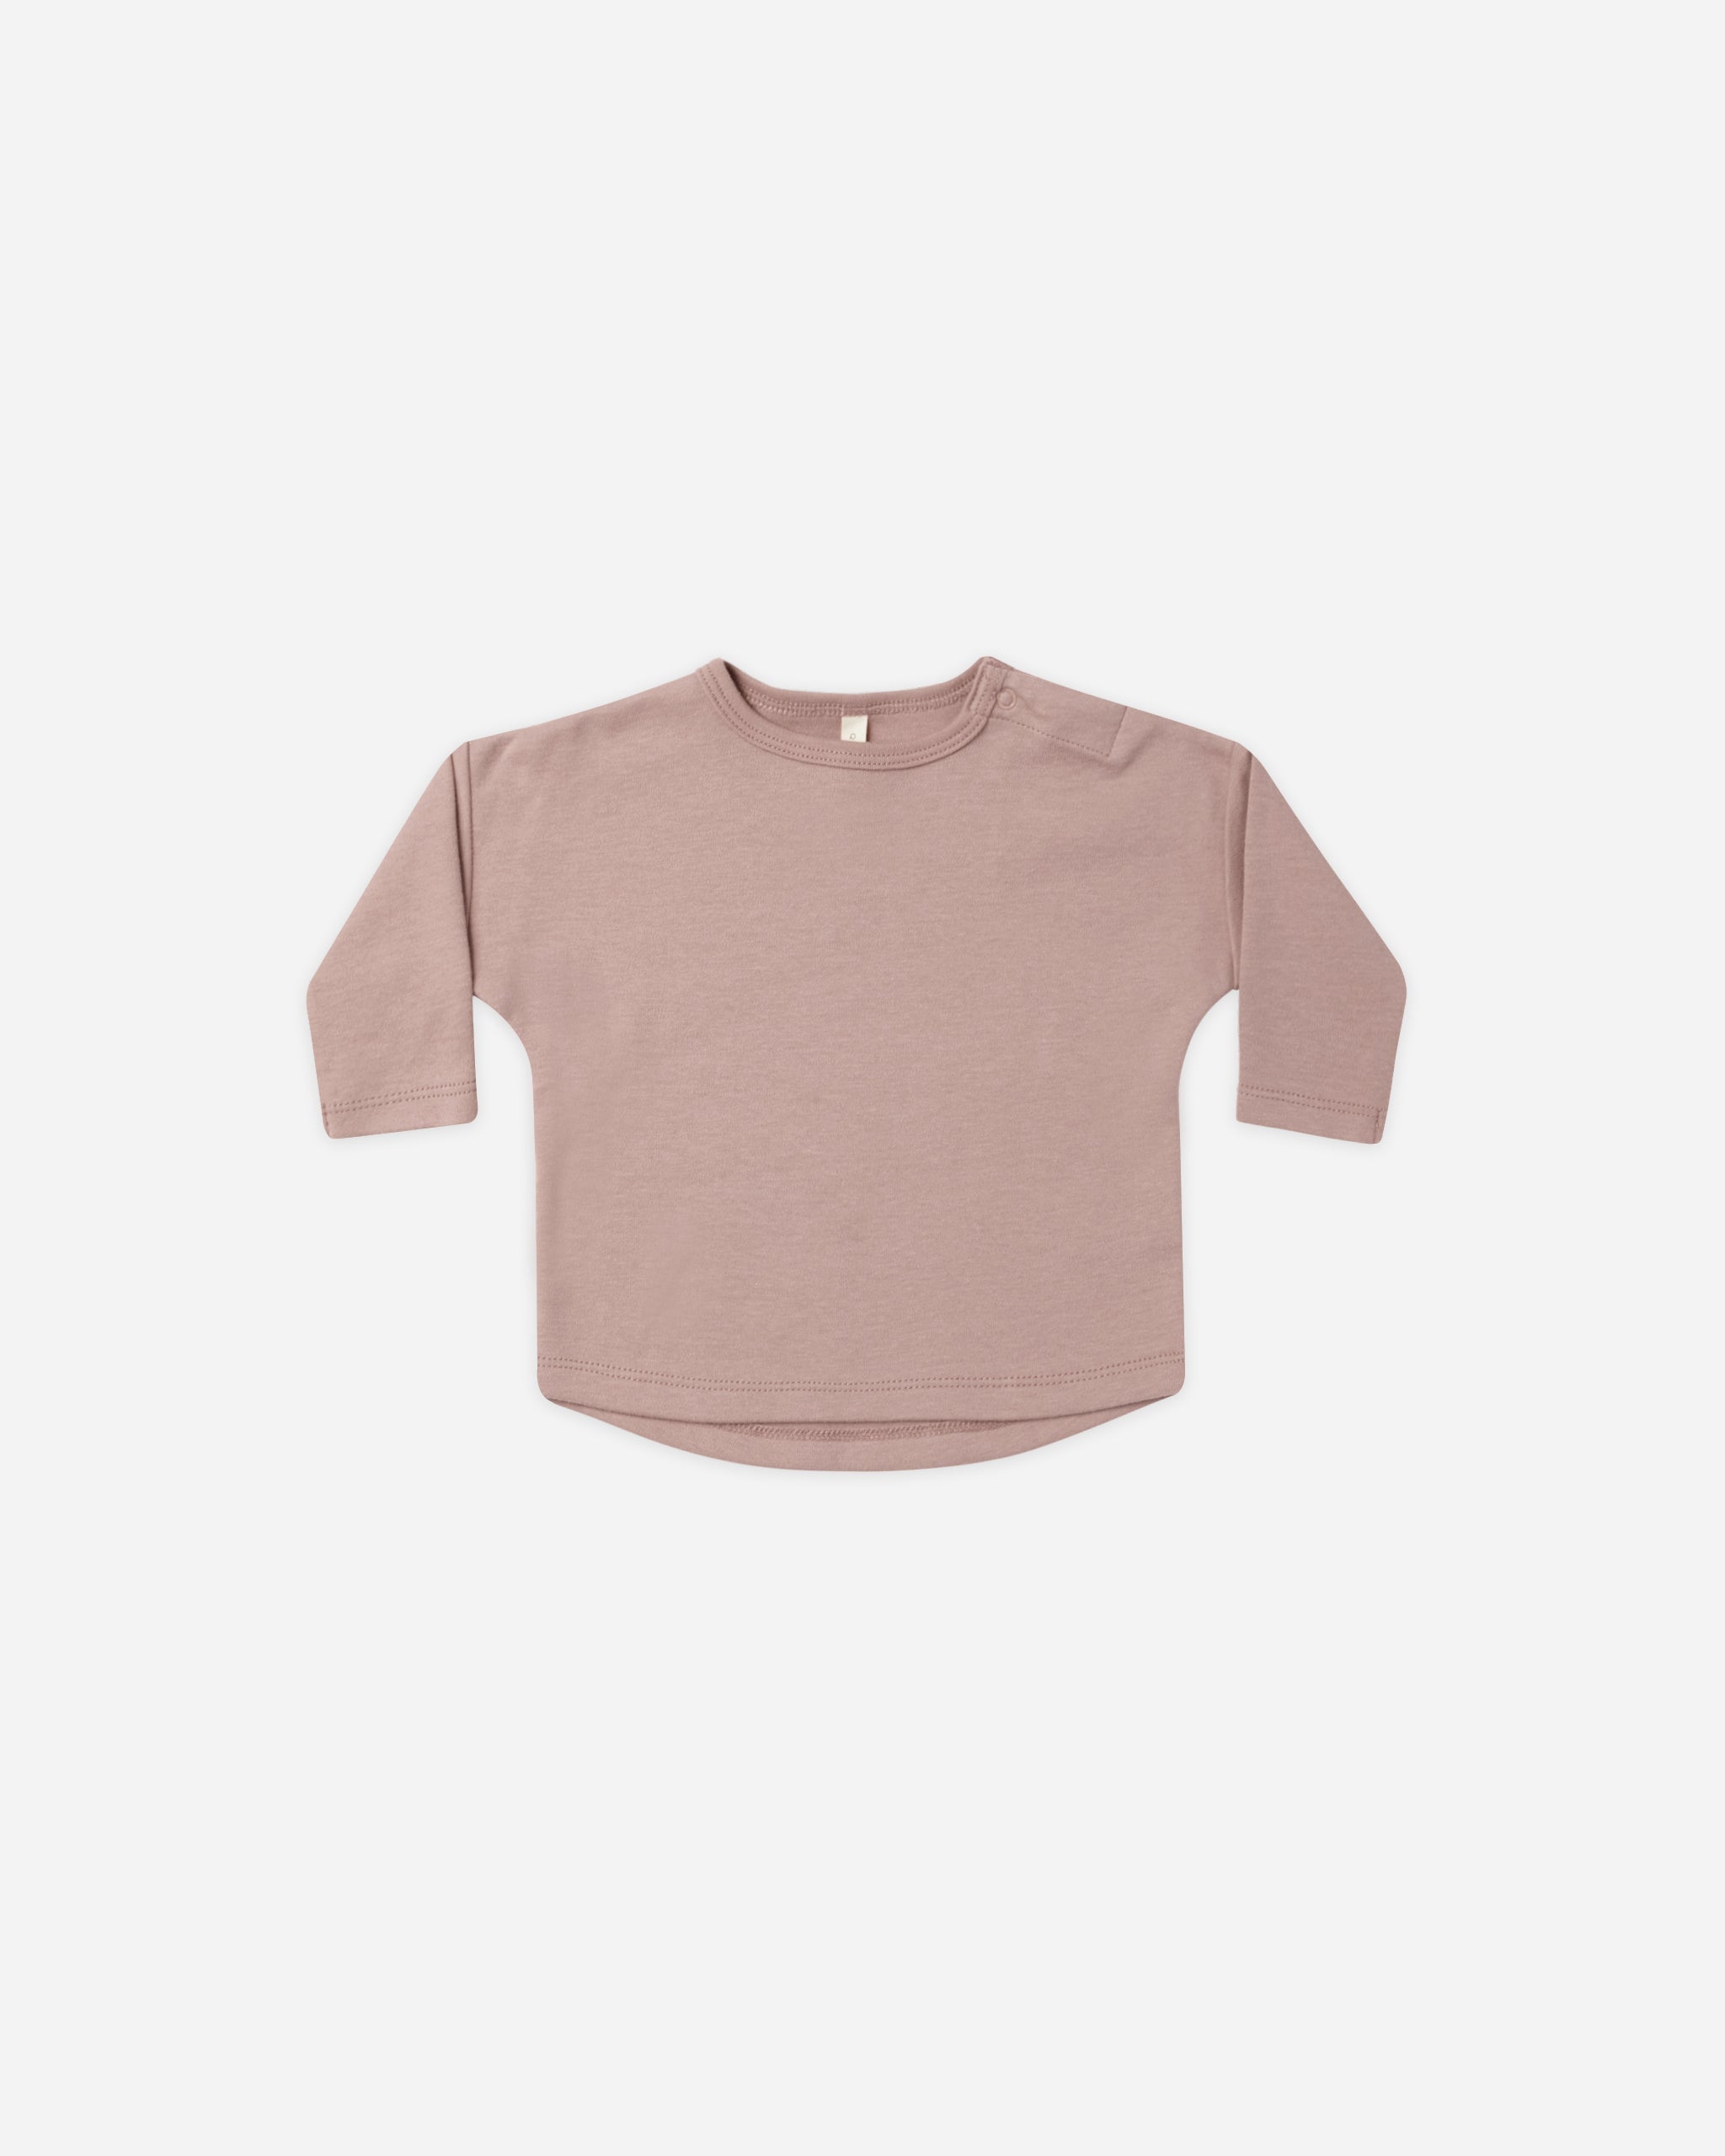 Long Sleeve Tee || Mauve - Rylee + Cru | Kids Clothes | Trendy Baby Clothes | Modern Infant Outfits |